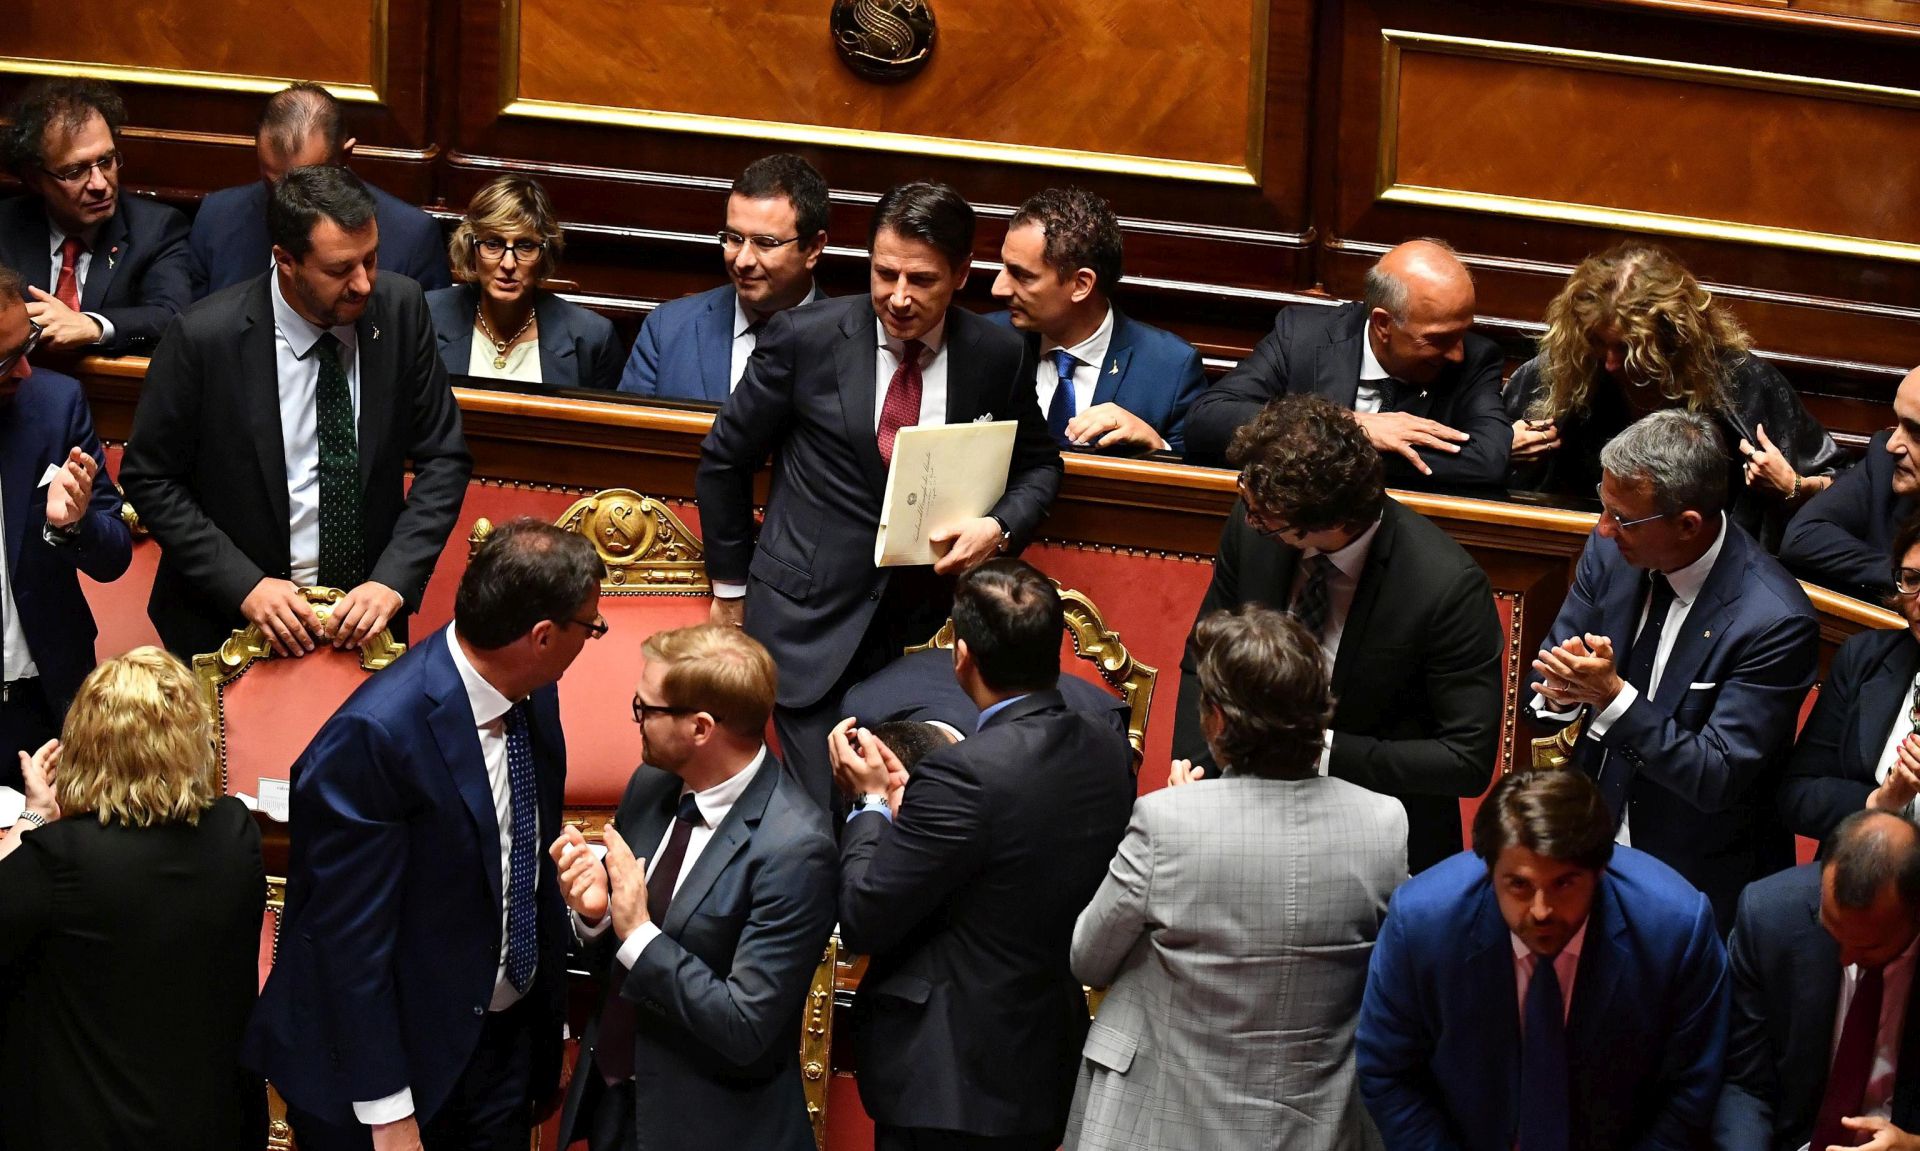 epa07782246 Italian Premier Giuseppe Conte (C) arrives to deliver a speech at the Senate in Rome, Italy, 20 August 2019 as Deputy Premier and Interior Minister Matteo Salvini (L) looks on. Conte in his address called bringing about the government crisis  irresponsible. Salvini and his party League pulled out from government and caused a political crisis a week ago.  EPA/ETTORE FERRARI